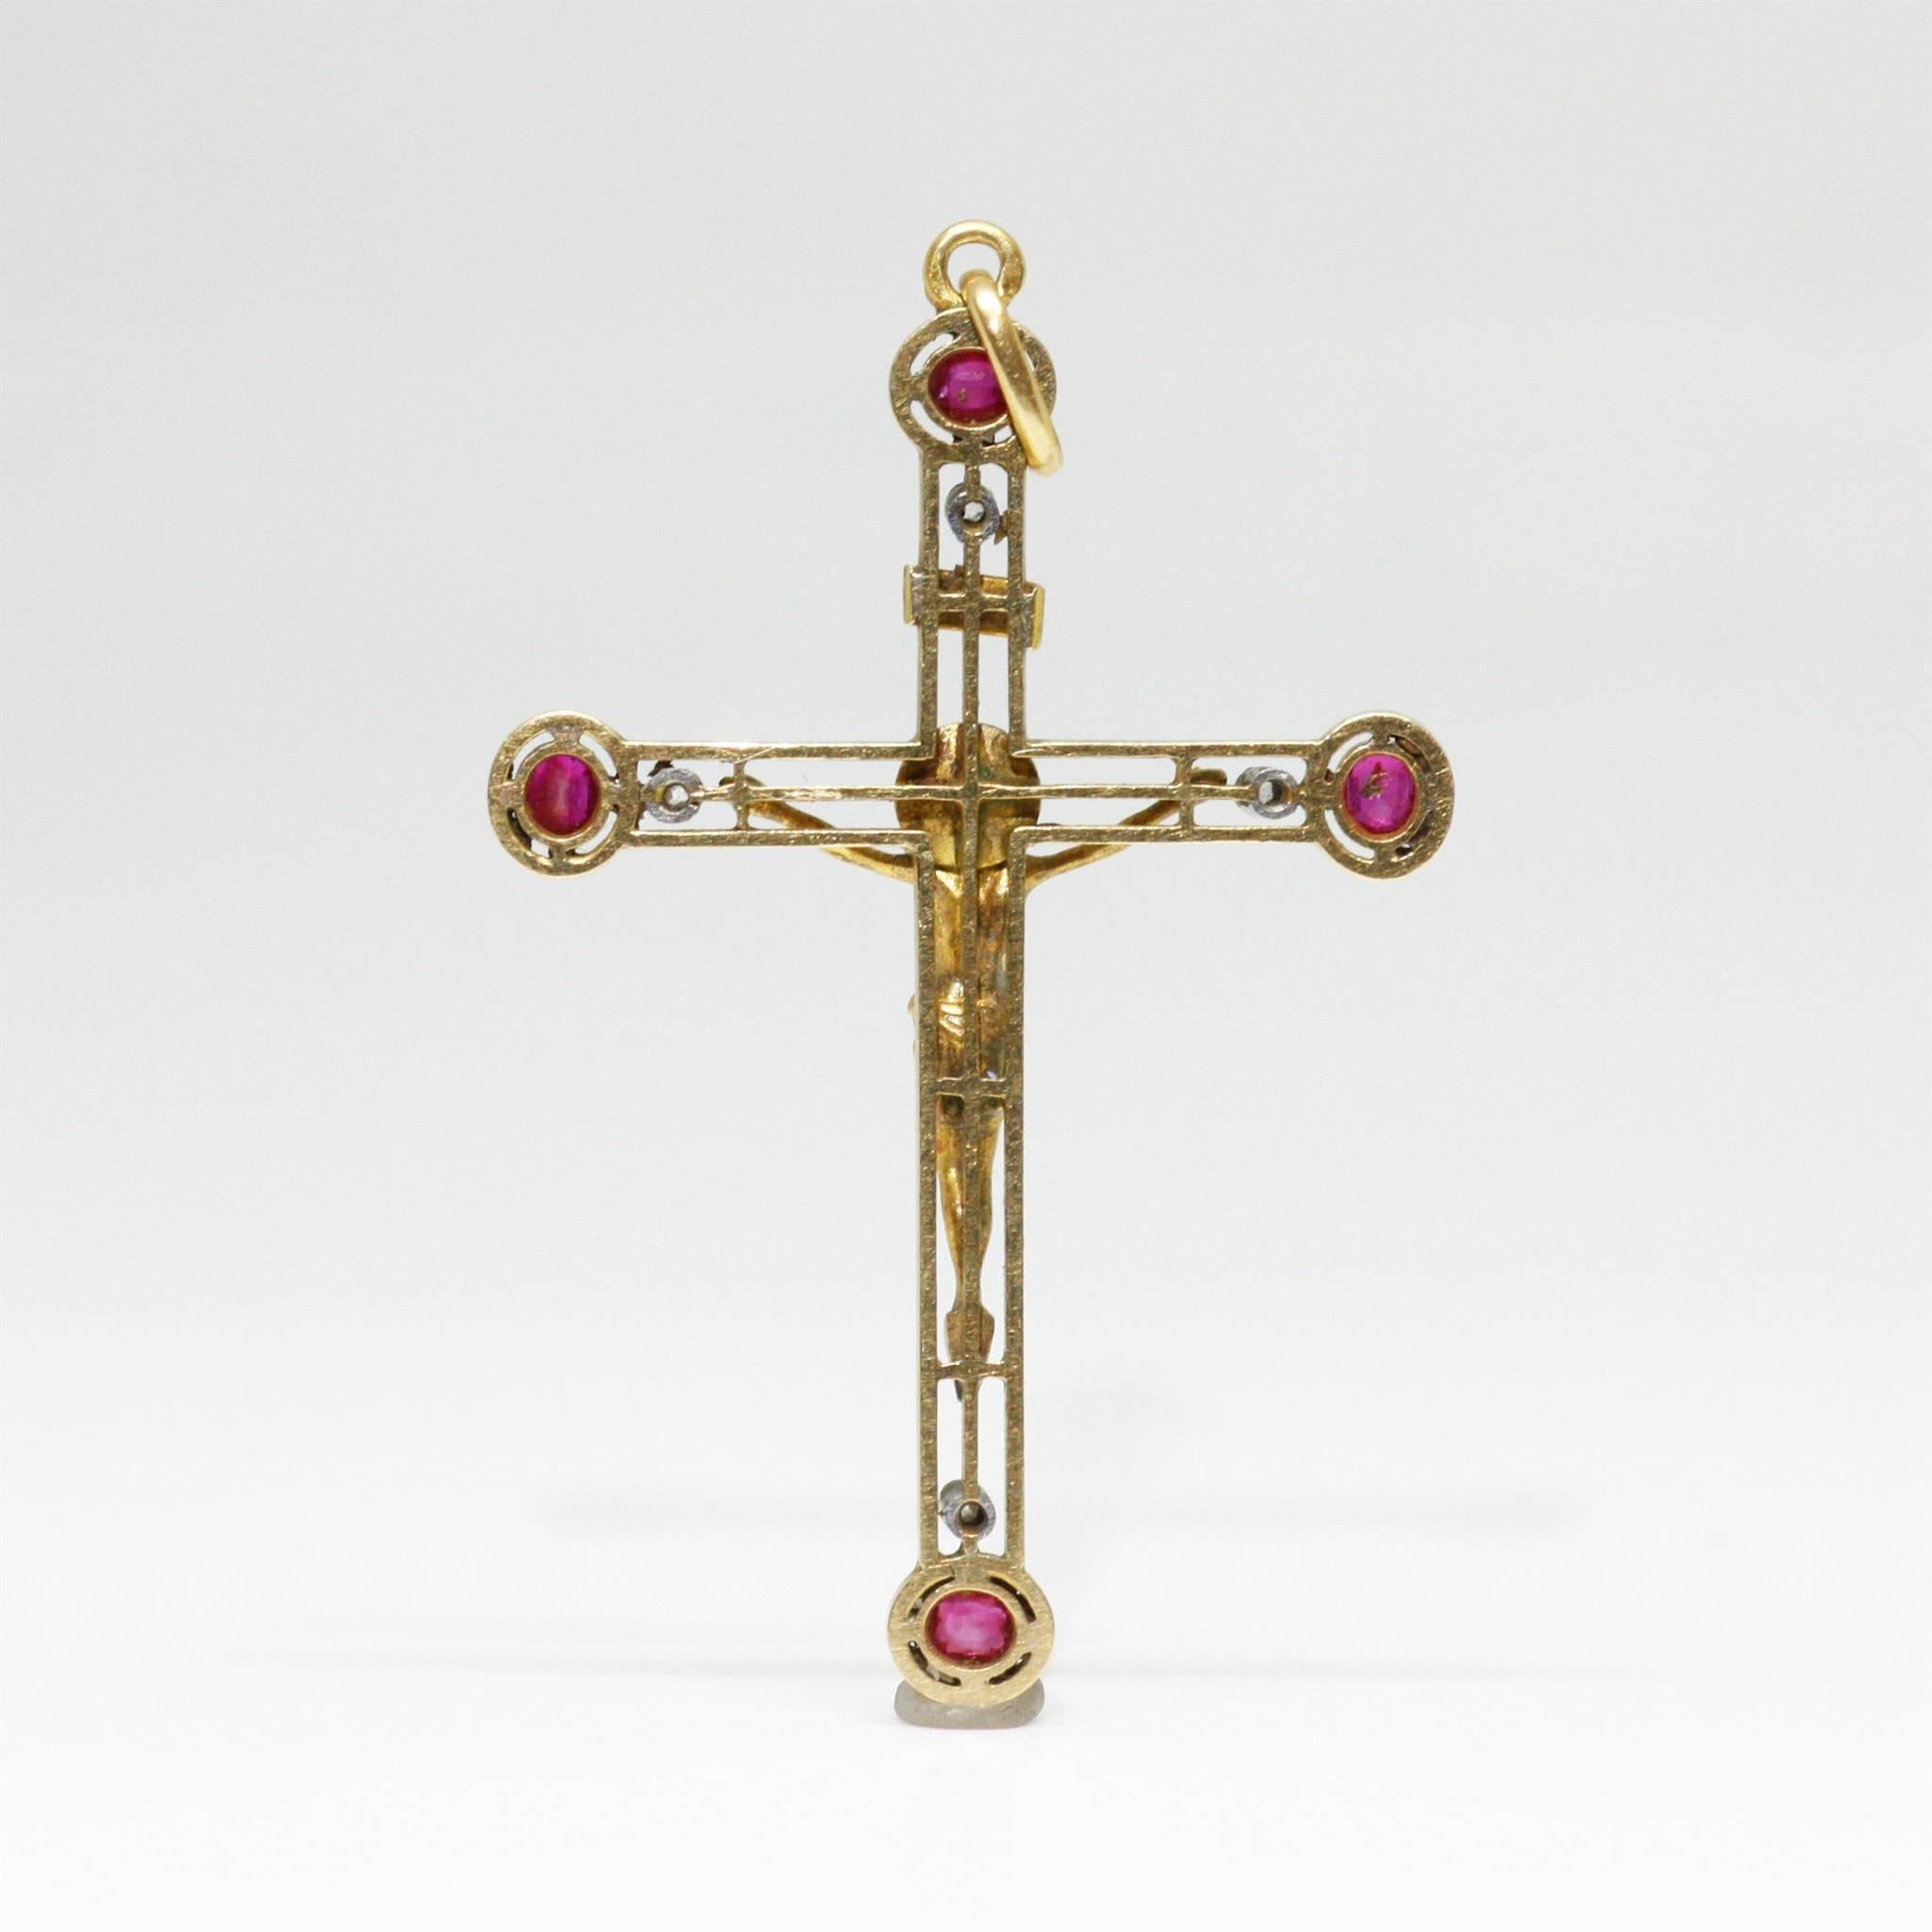 Yellow 18K gold crucifix cross with Jesus Christ. This beautiful cross is enhanced with 4 smalll rubies (raspberry color, probably of Burmese origine) and 4 tiny diamonds. 
Perfect condition.
French (hallmark : eagle’s head), circa 1900

Height : 54